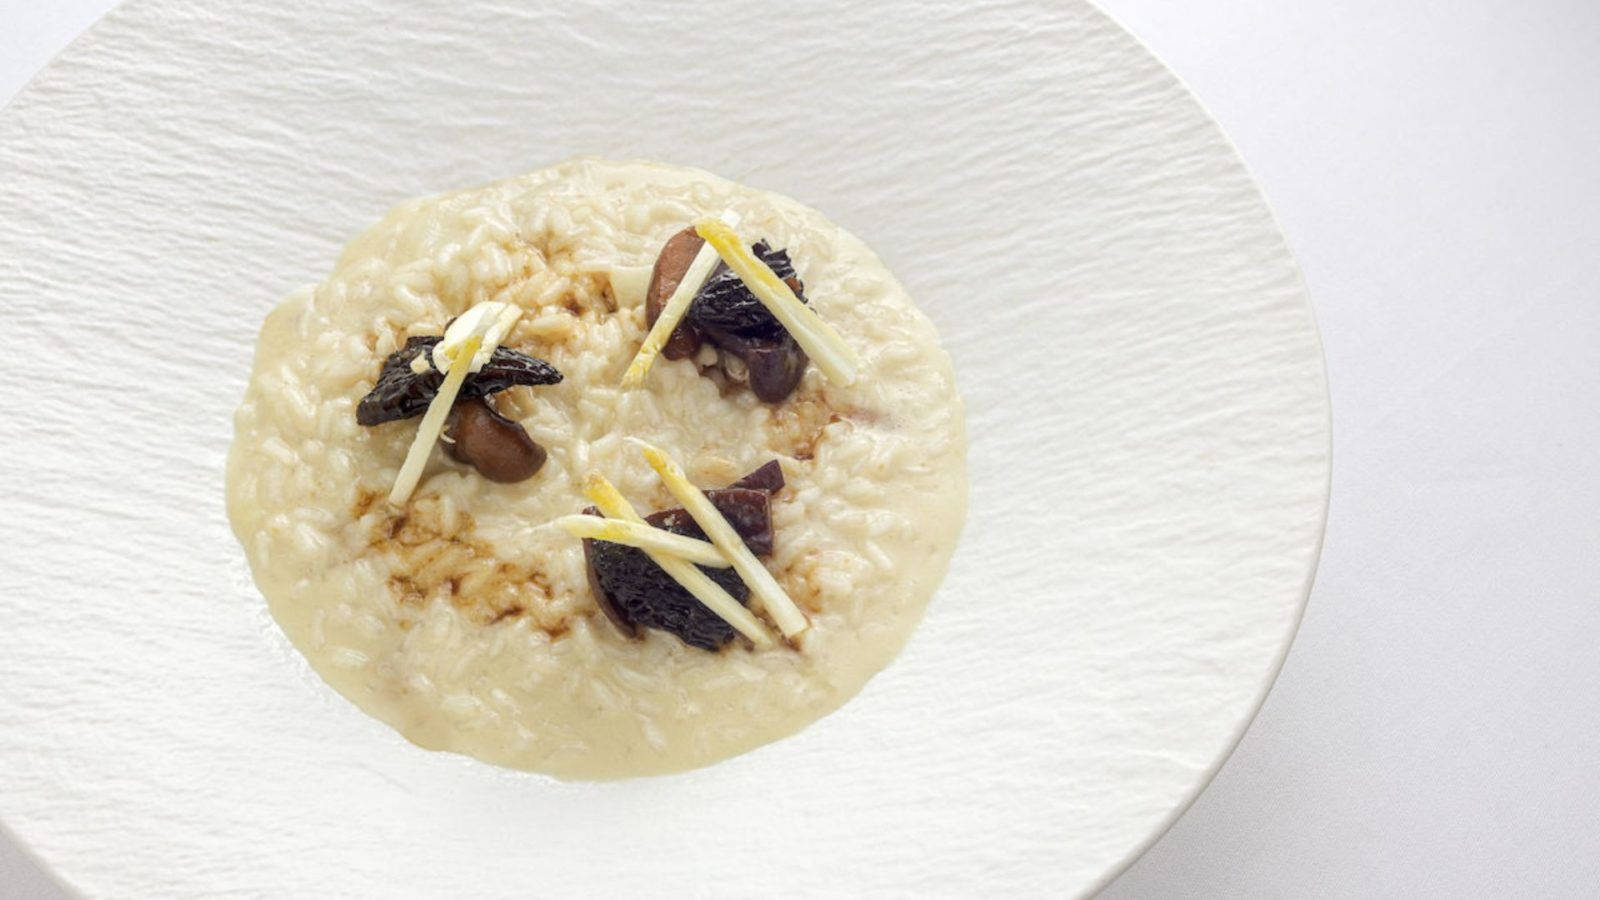 "Savory White Asparagus Risotto served hot and fresh" Wallpaper